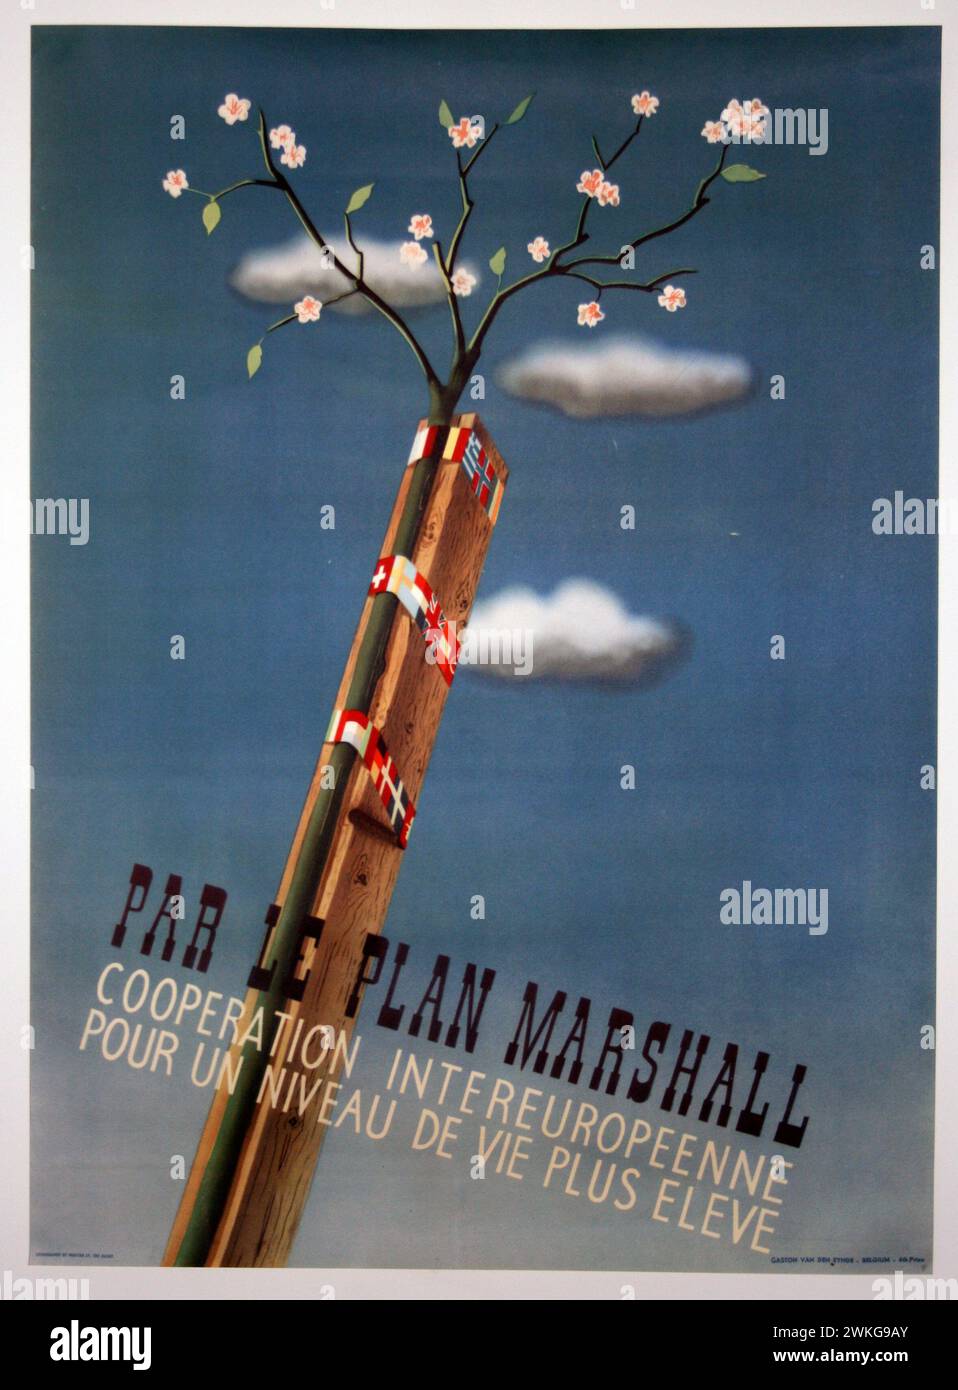 Vintage Travel Poster Marshall Plan, Postwar cooperation for a better Europe 1940s Stock Photo